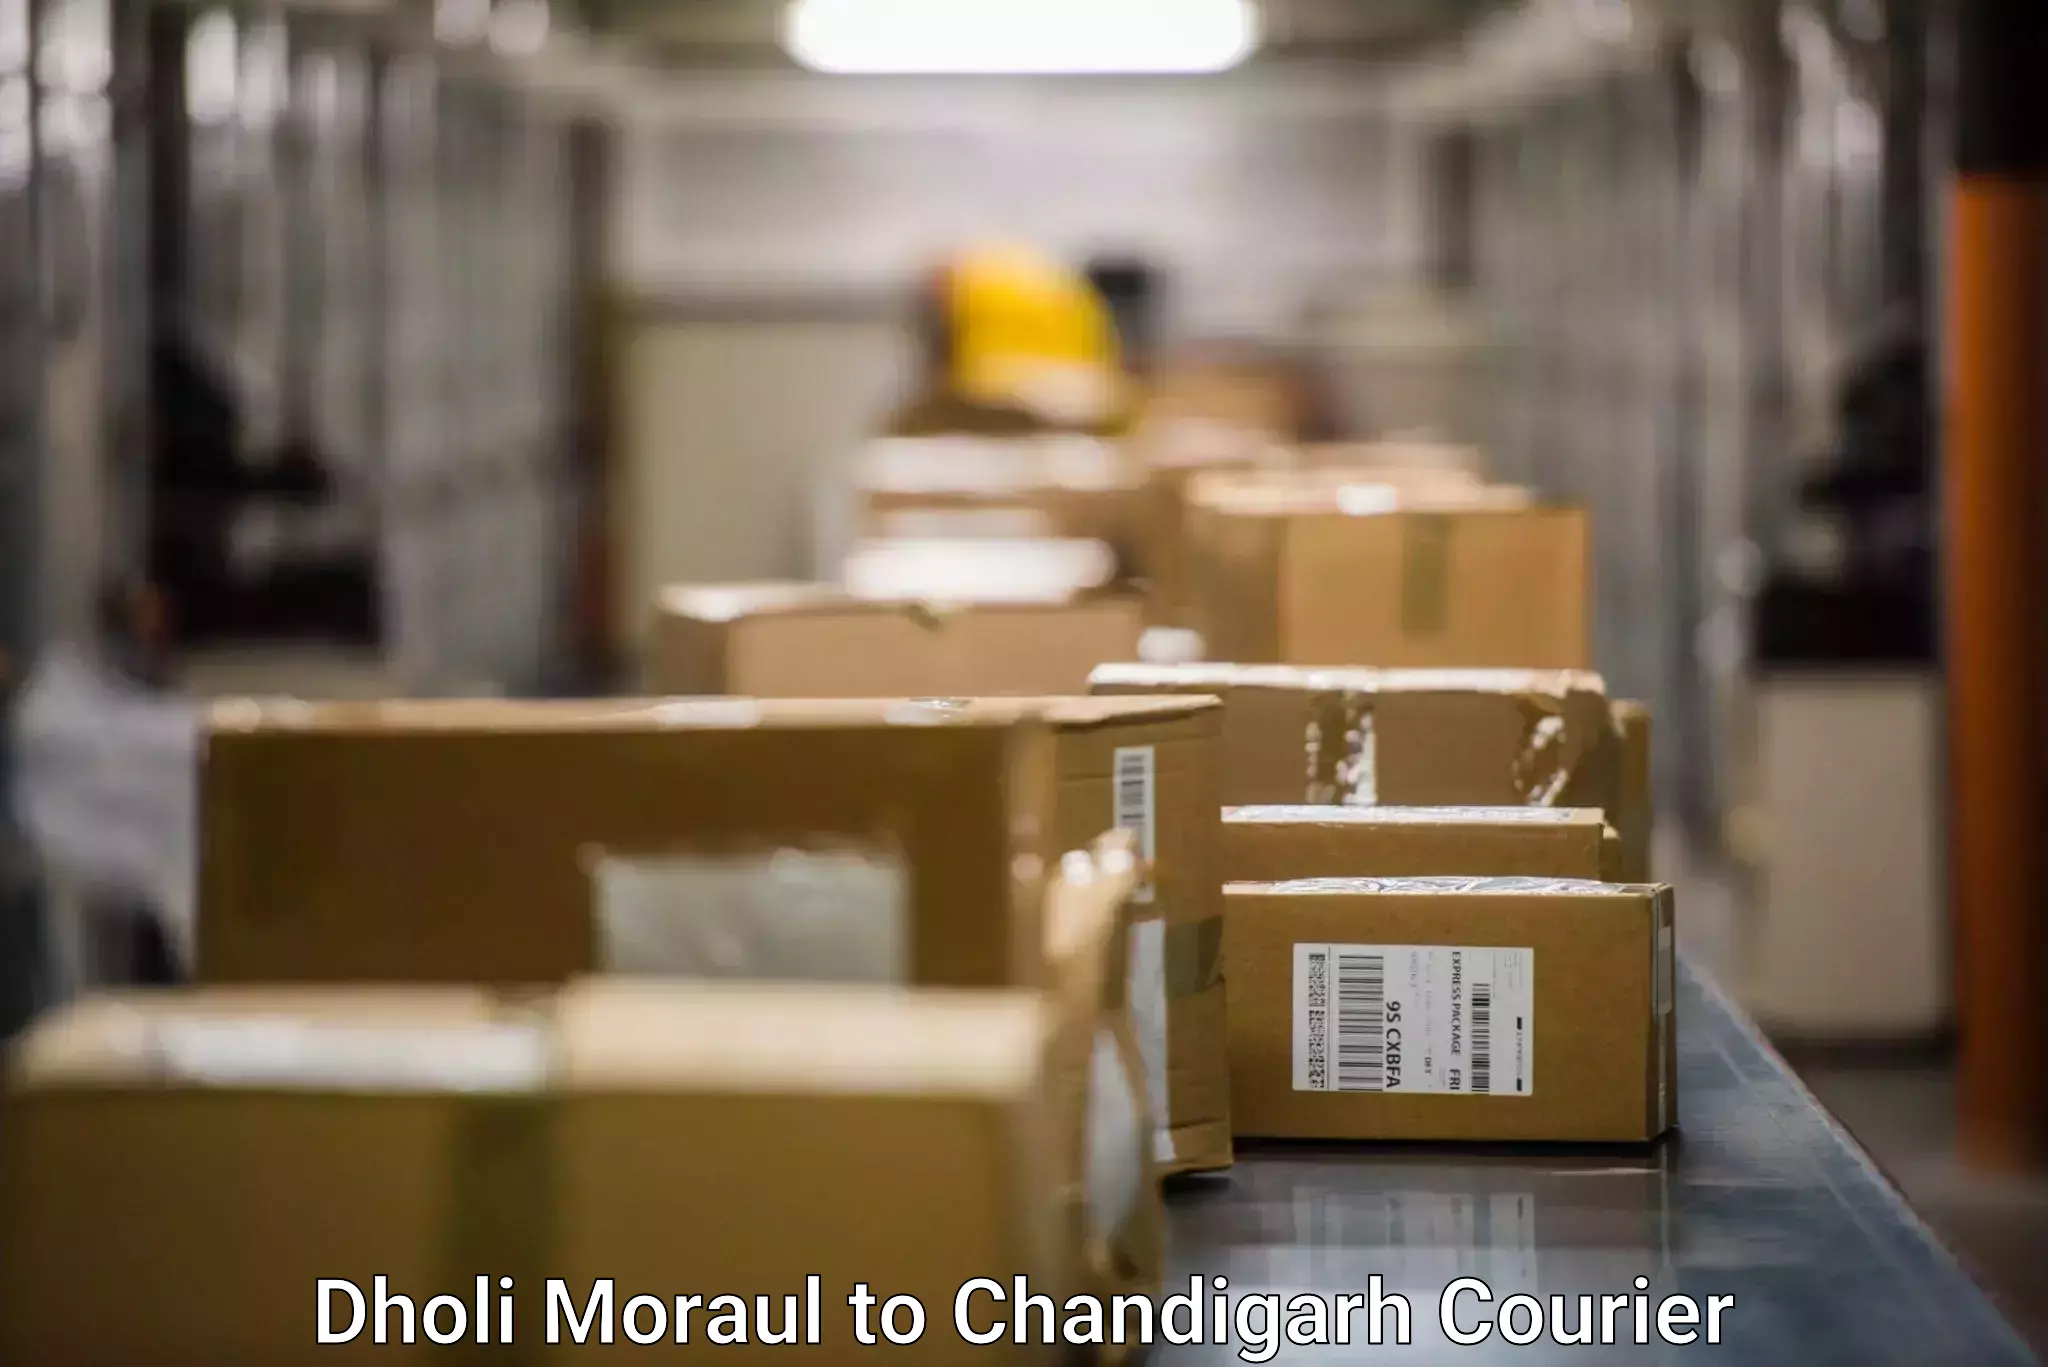 Multi-service courier options Dholi Moraul to Chandigarh